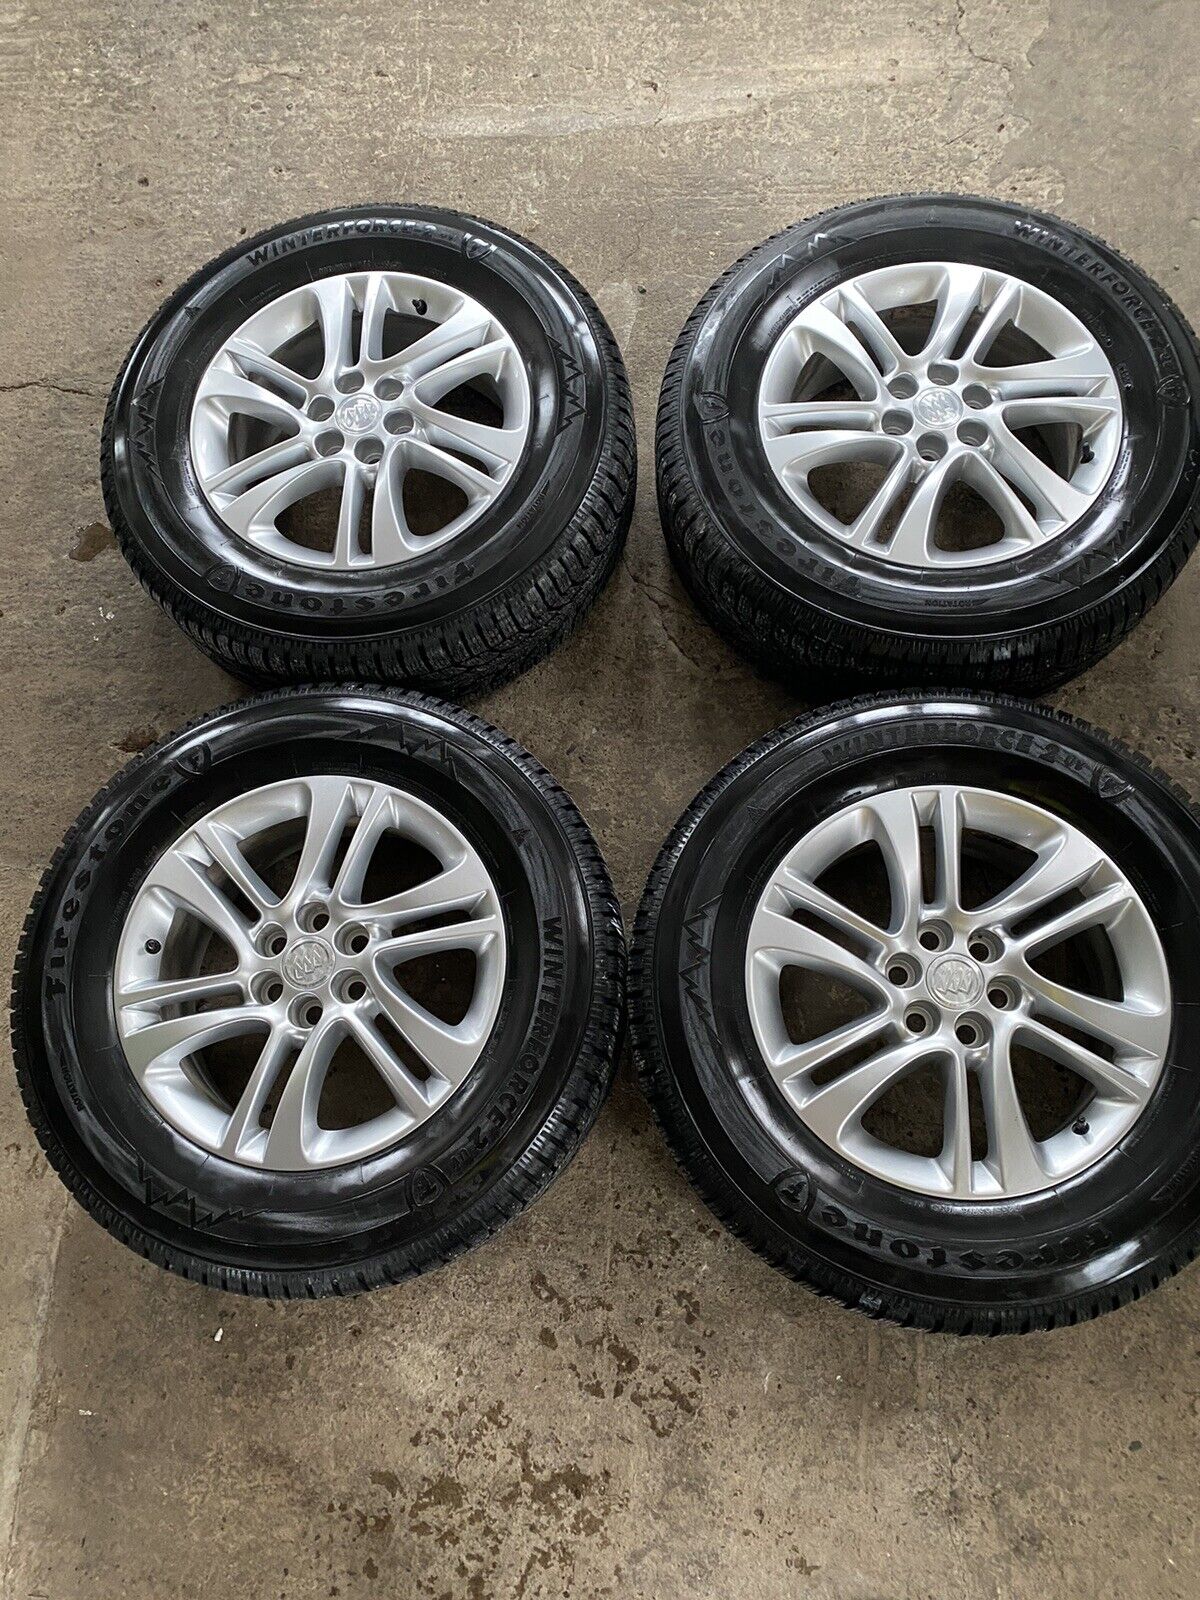 Buick Enclave Chevy Traverse wheels and snow tires